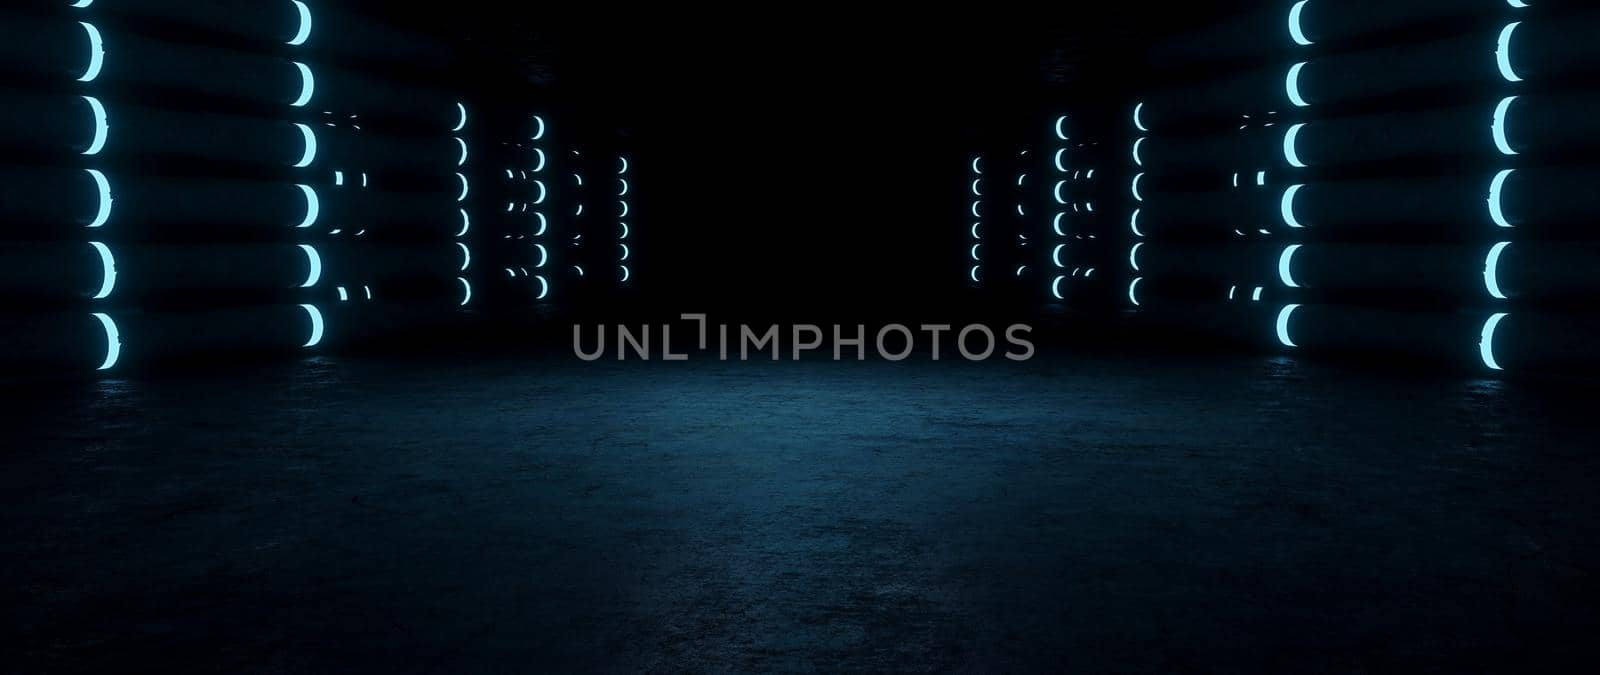 Elegant Club Underground Dimmed Black Abstract Background Concept Of The Future For Graphic Design 3D Illustration